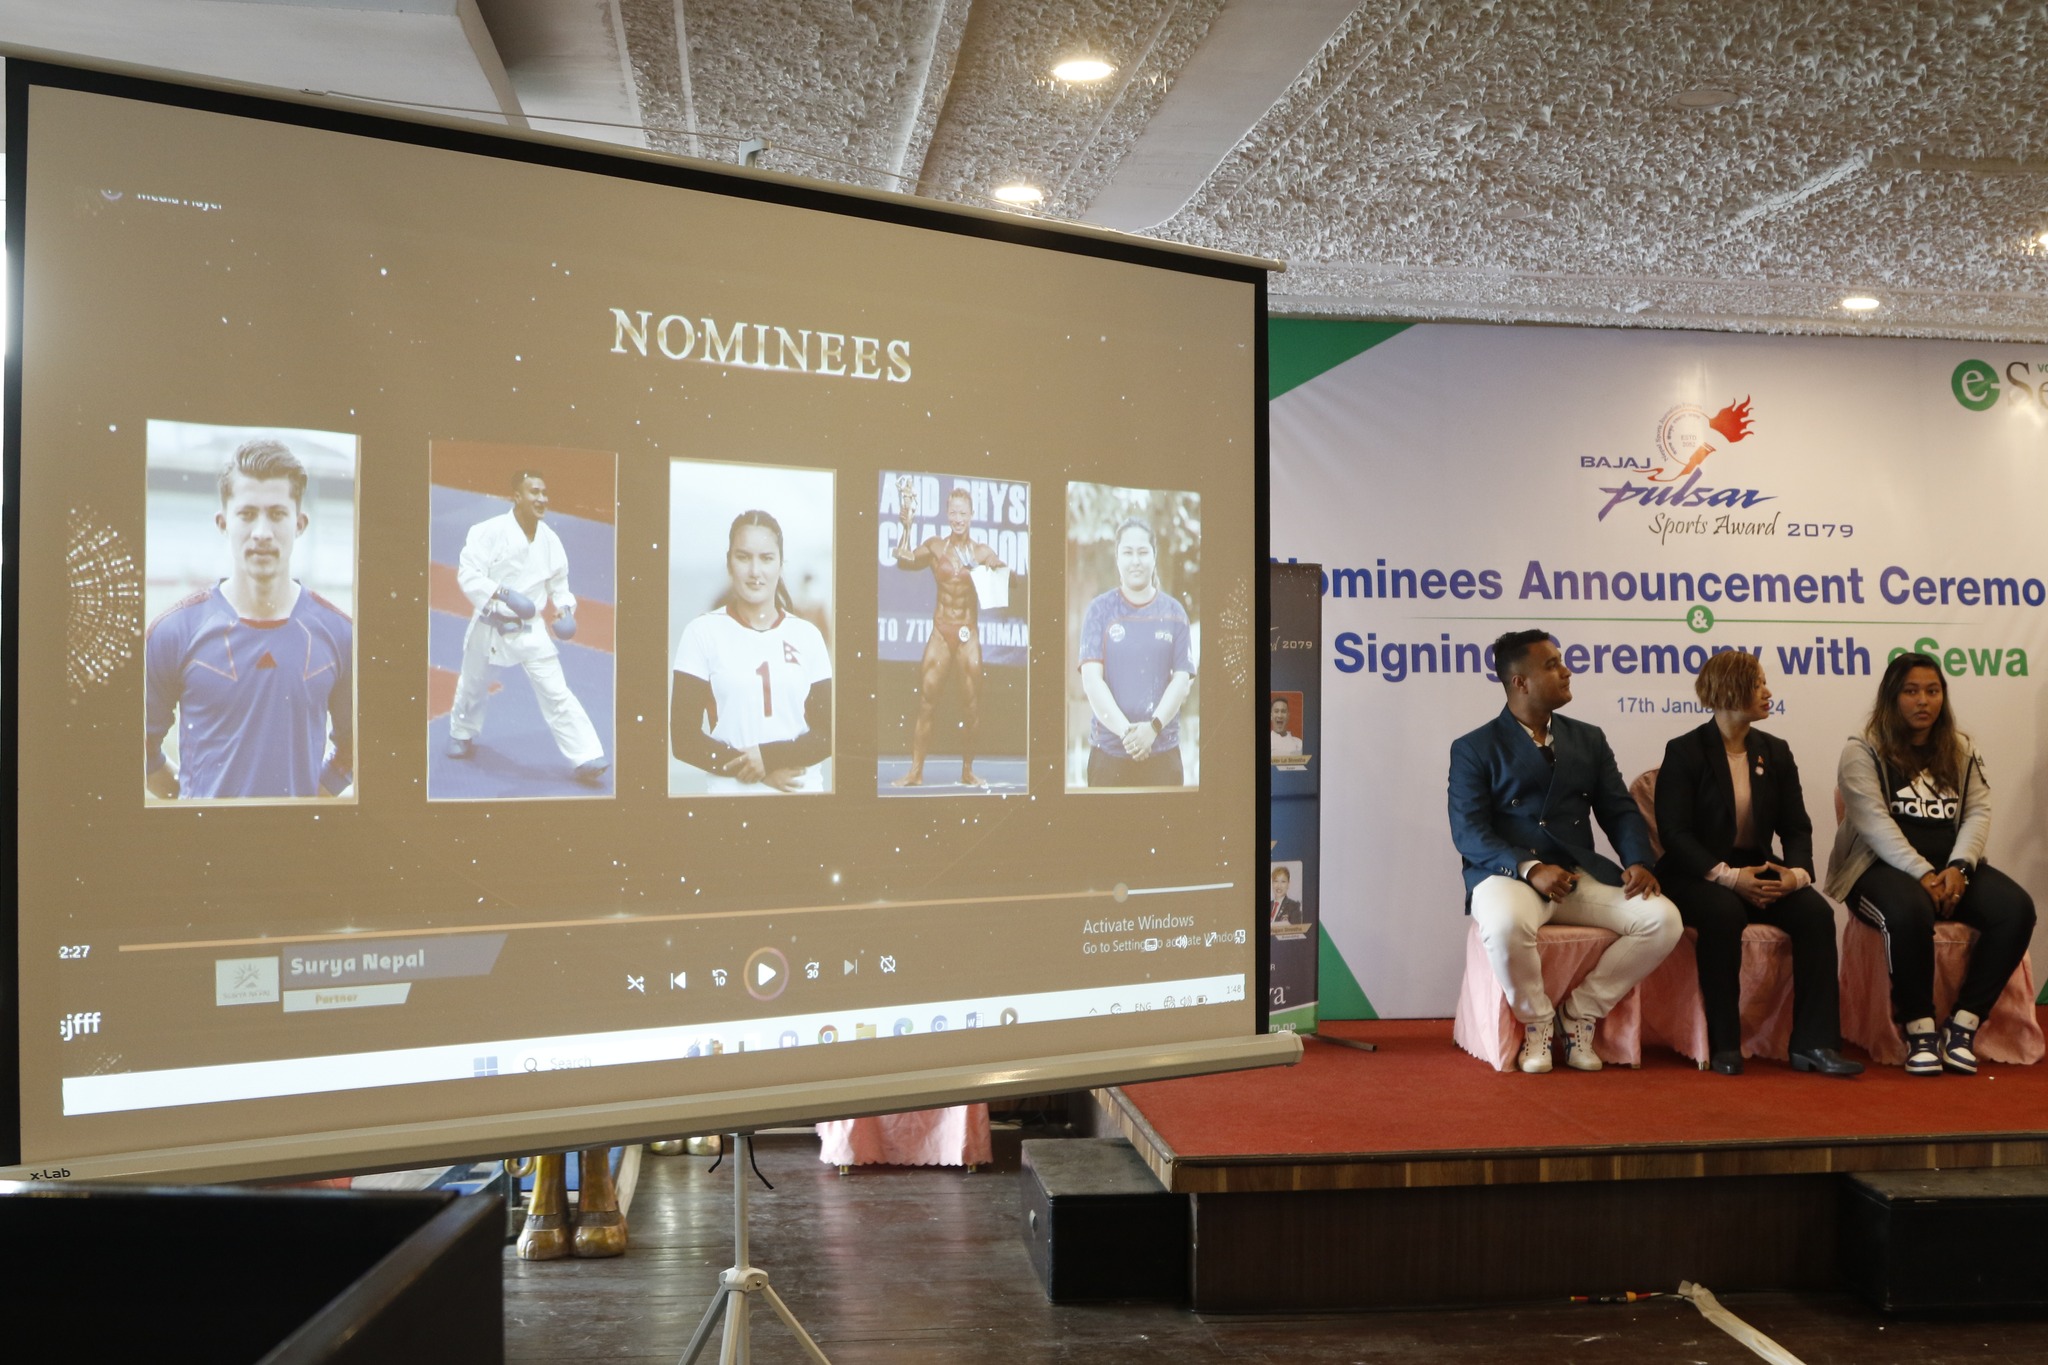 Pulsar Sports Awards’ People’s Choice nominees announced